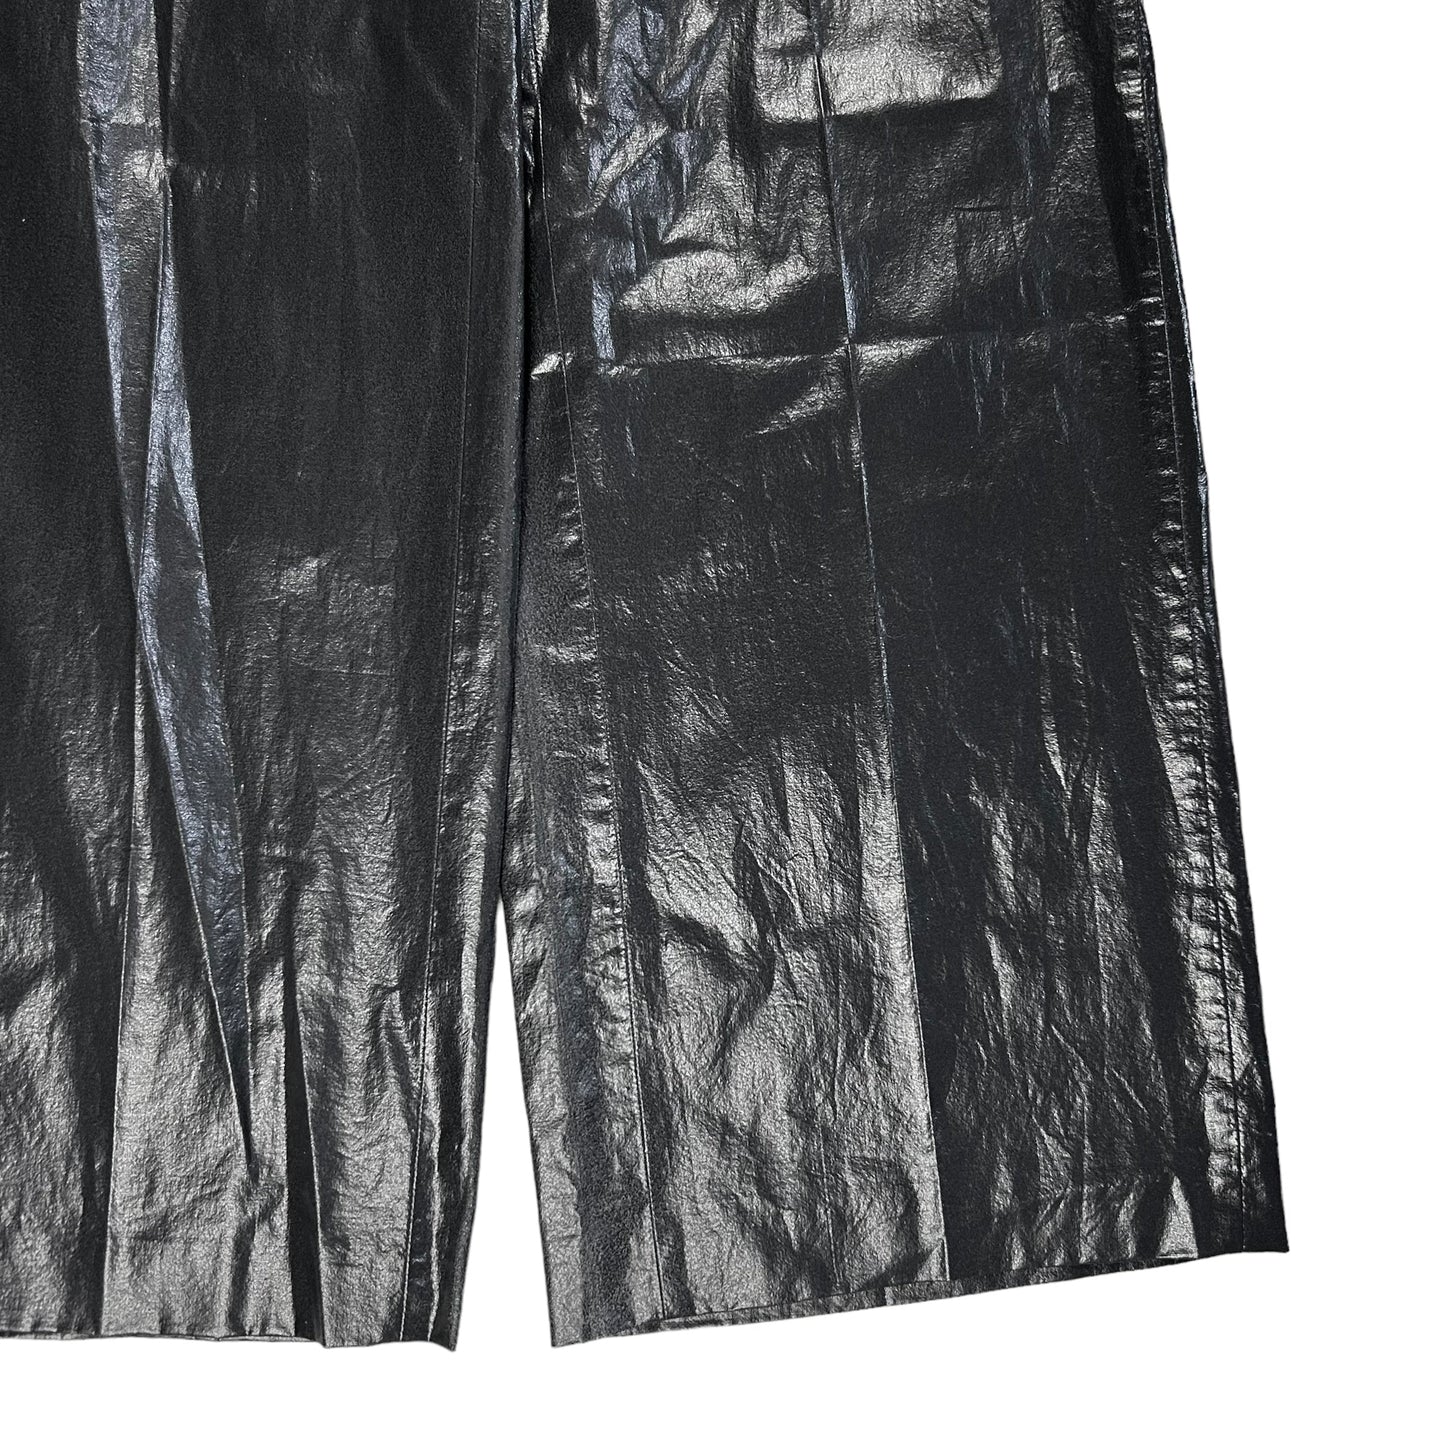 MM6 Maison Margiela Dyed Leather Look Pants - AW22